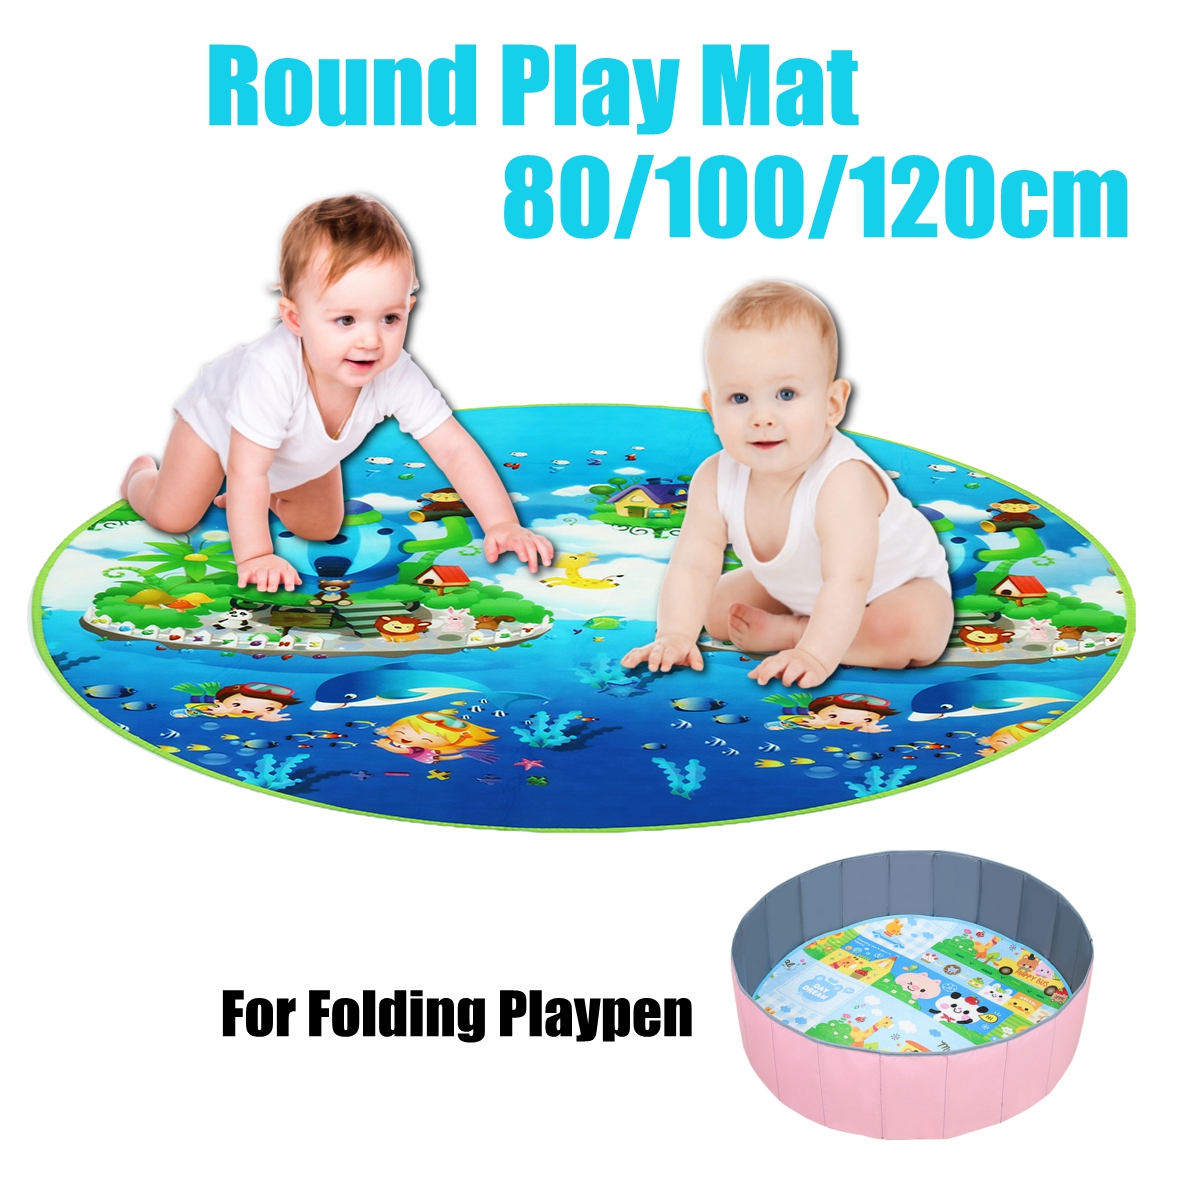 1cm-Thick-Dia-80100120cm-Baby-Crawling-Play-Mat-Educational-Alphabet-Game-Rug-For-Children-Puzzle-Ac-1632147-2